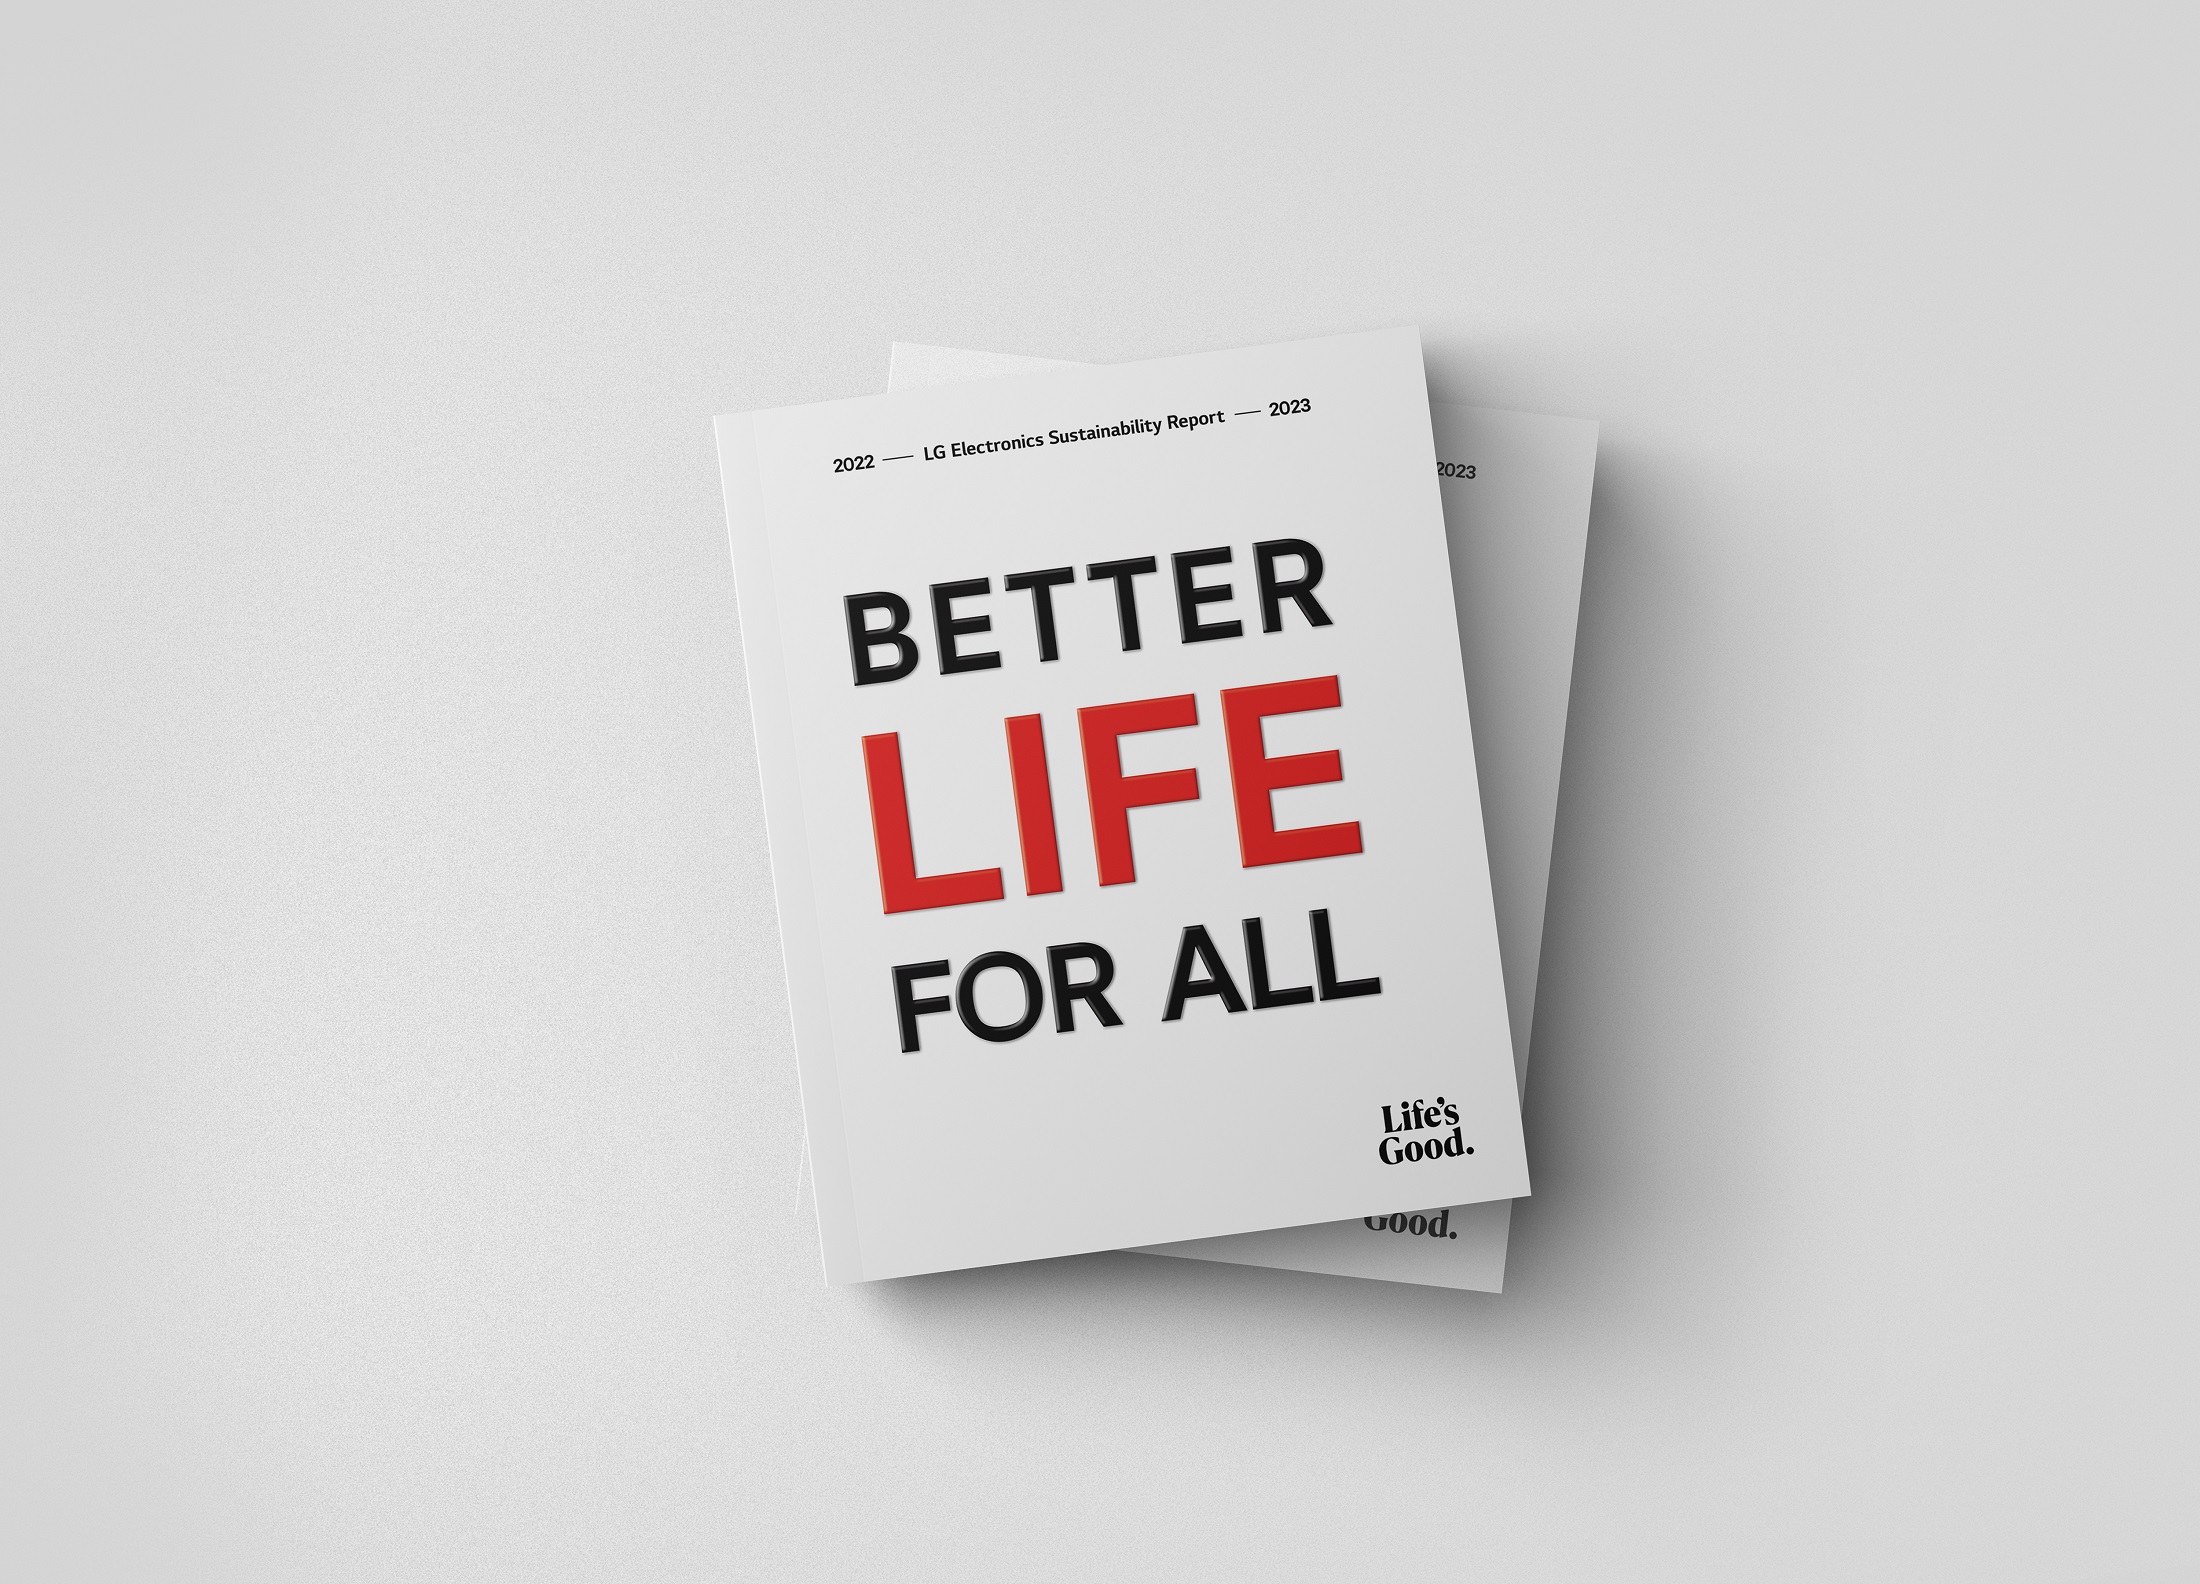 An illustration of a book titled 'BETTER LIFE FOR ALL' by LG